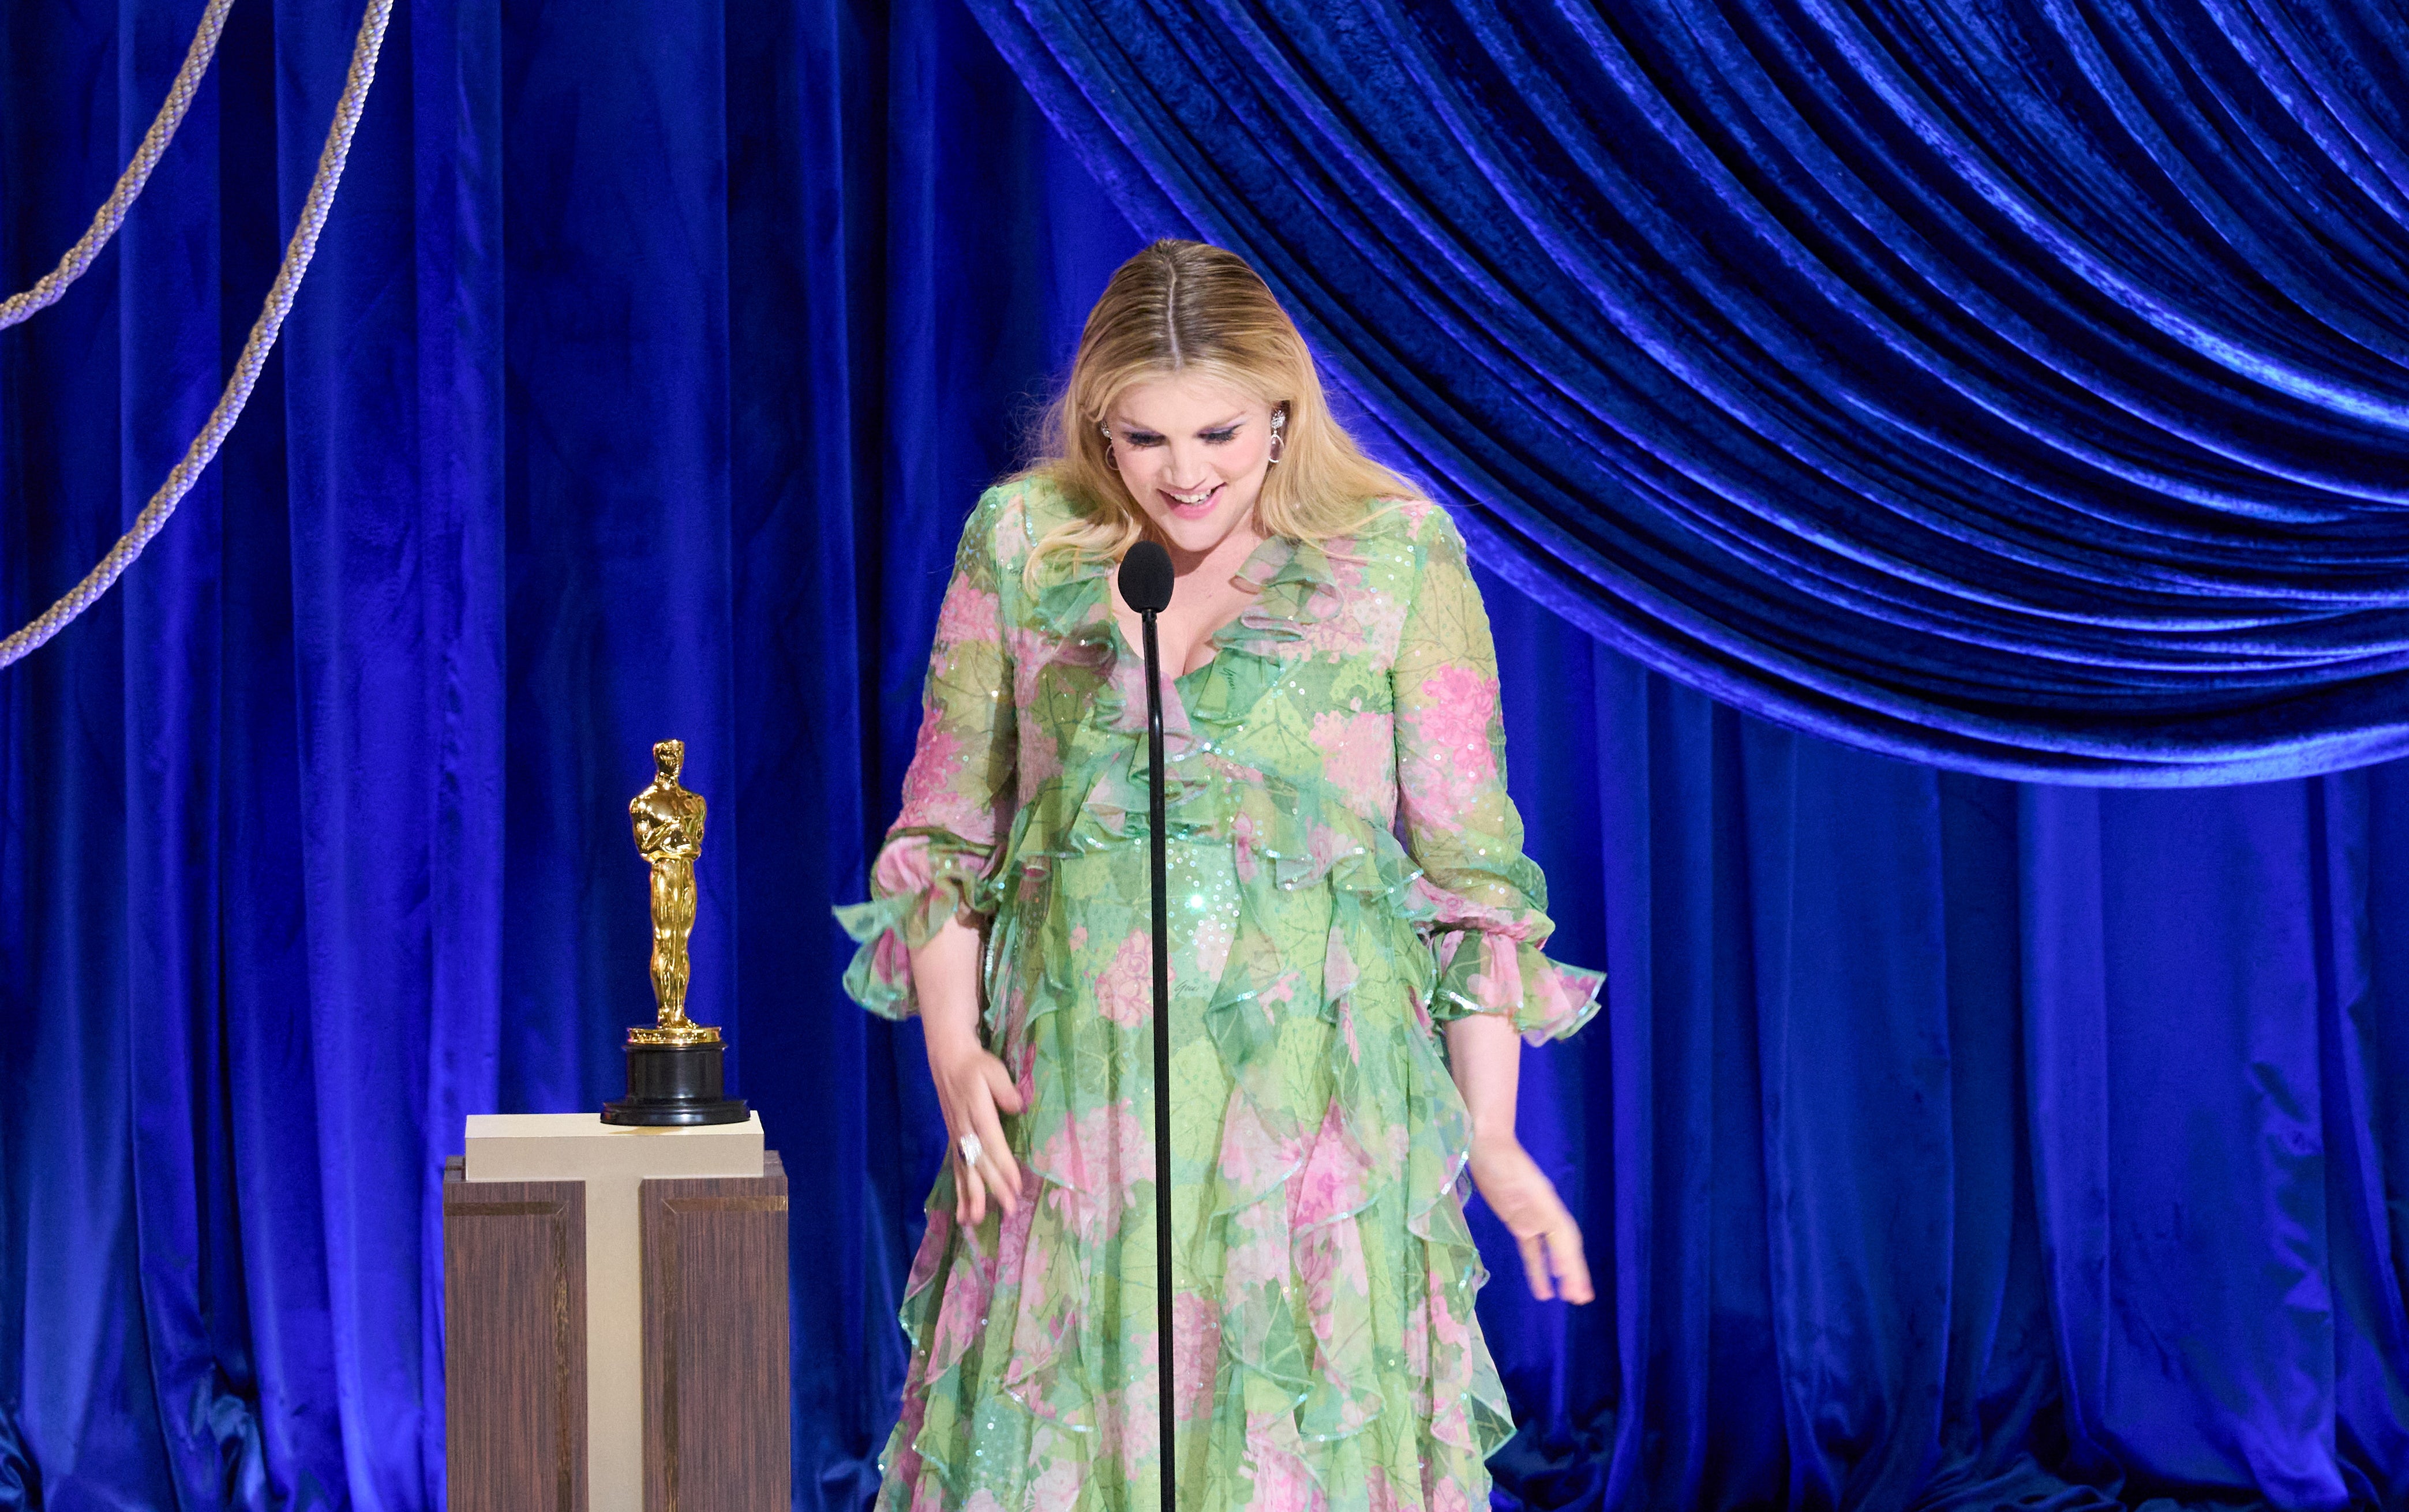 Emerald Fennell accepts the Oscar for Original Screenplay